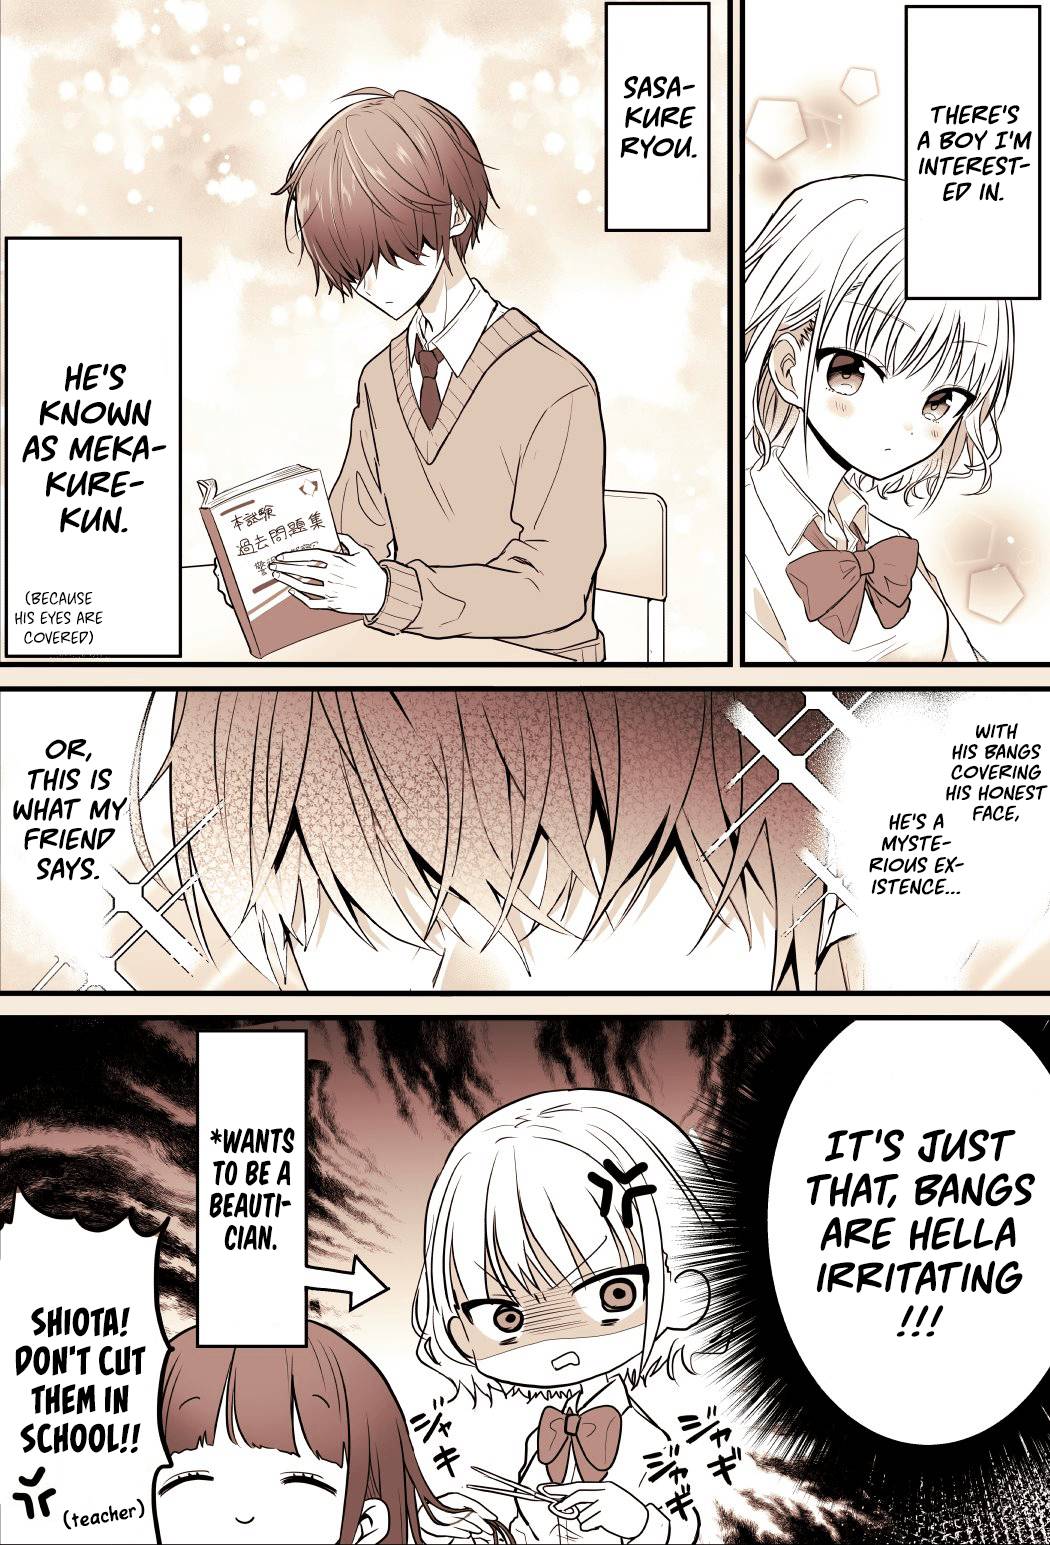 A Manga about being interested in a Mekakure Guy - chapter 1 - #1